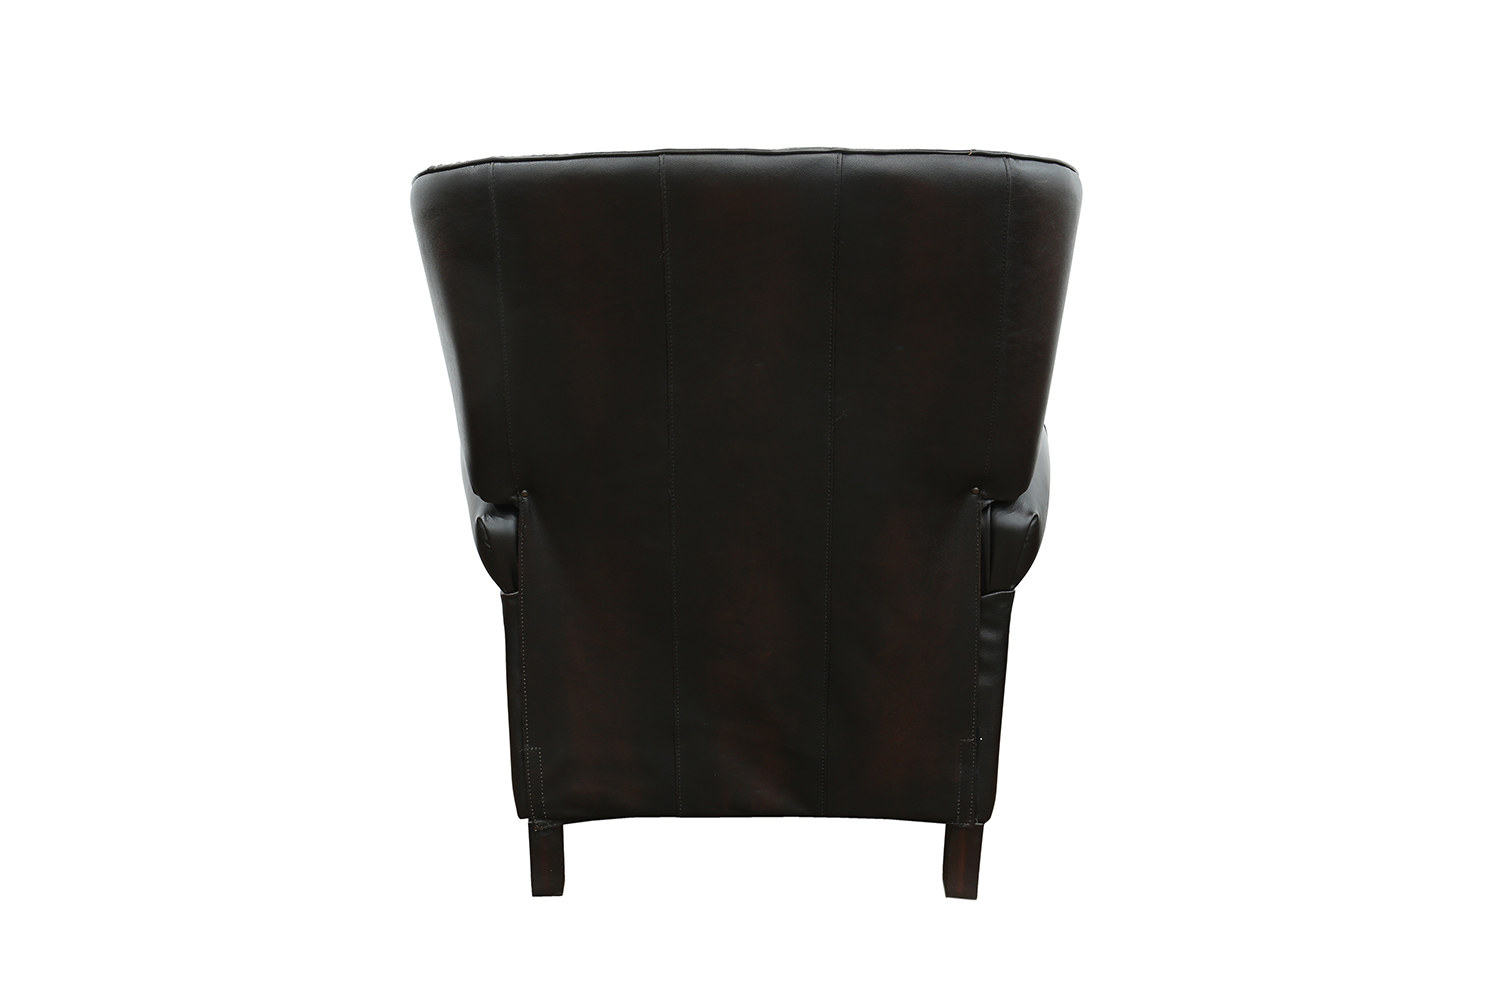 Barcalounger Presidential Recliner Chair - Stetson Coffee/All Leather